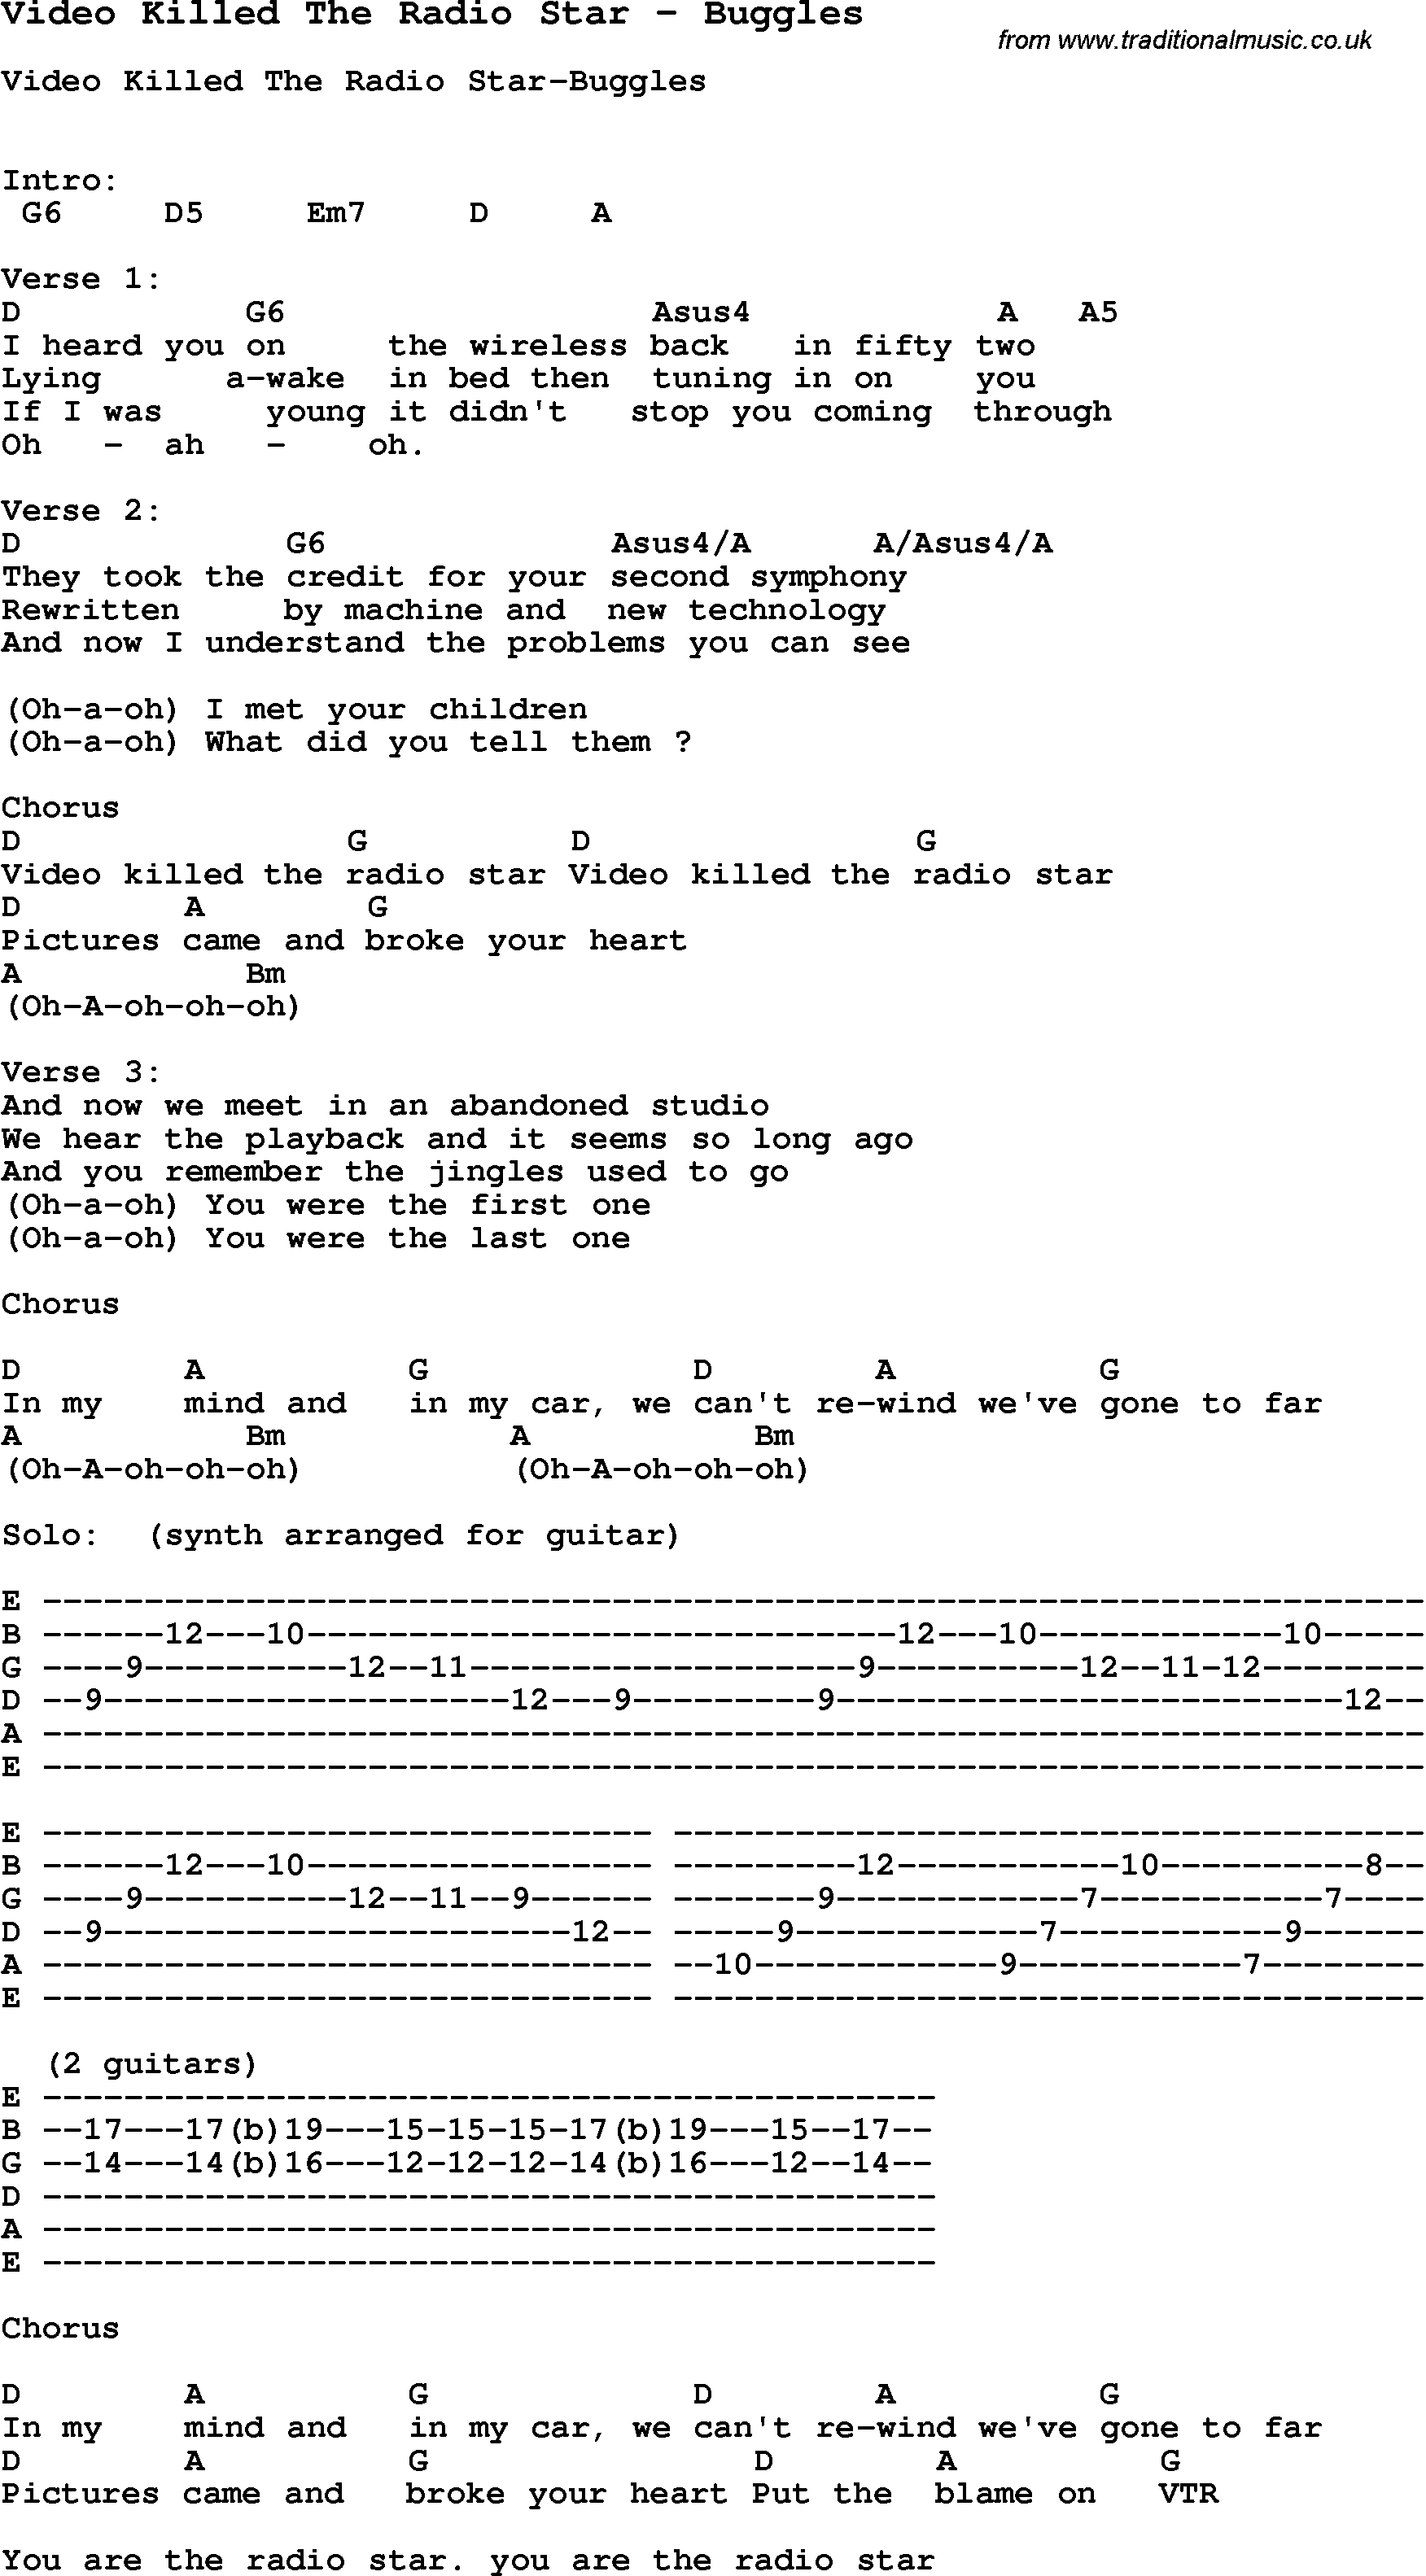 Song Video Killed The Radio Star by Buggles, with lyrics for vocal performance and accompaniment chords for Ukulele, Guitar Banjo etc.